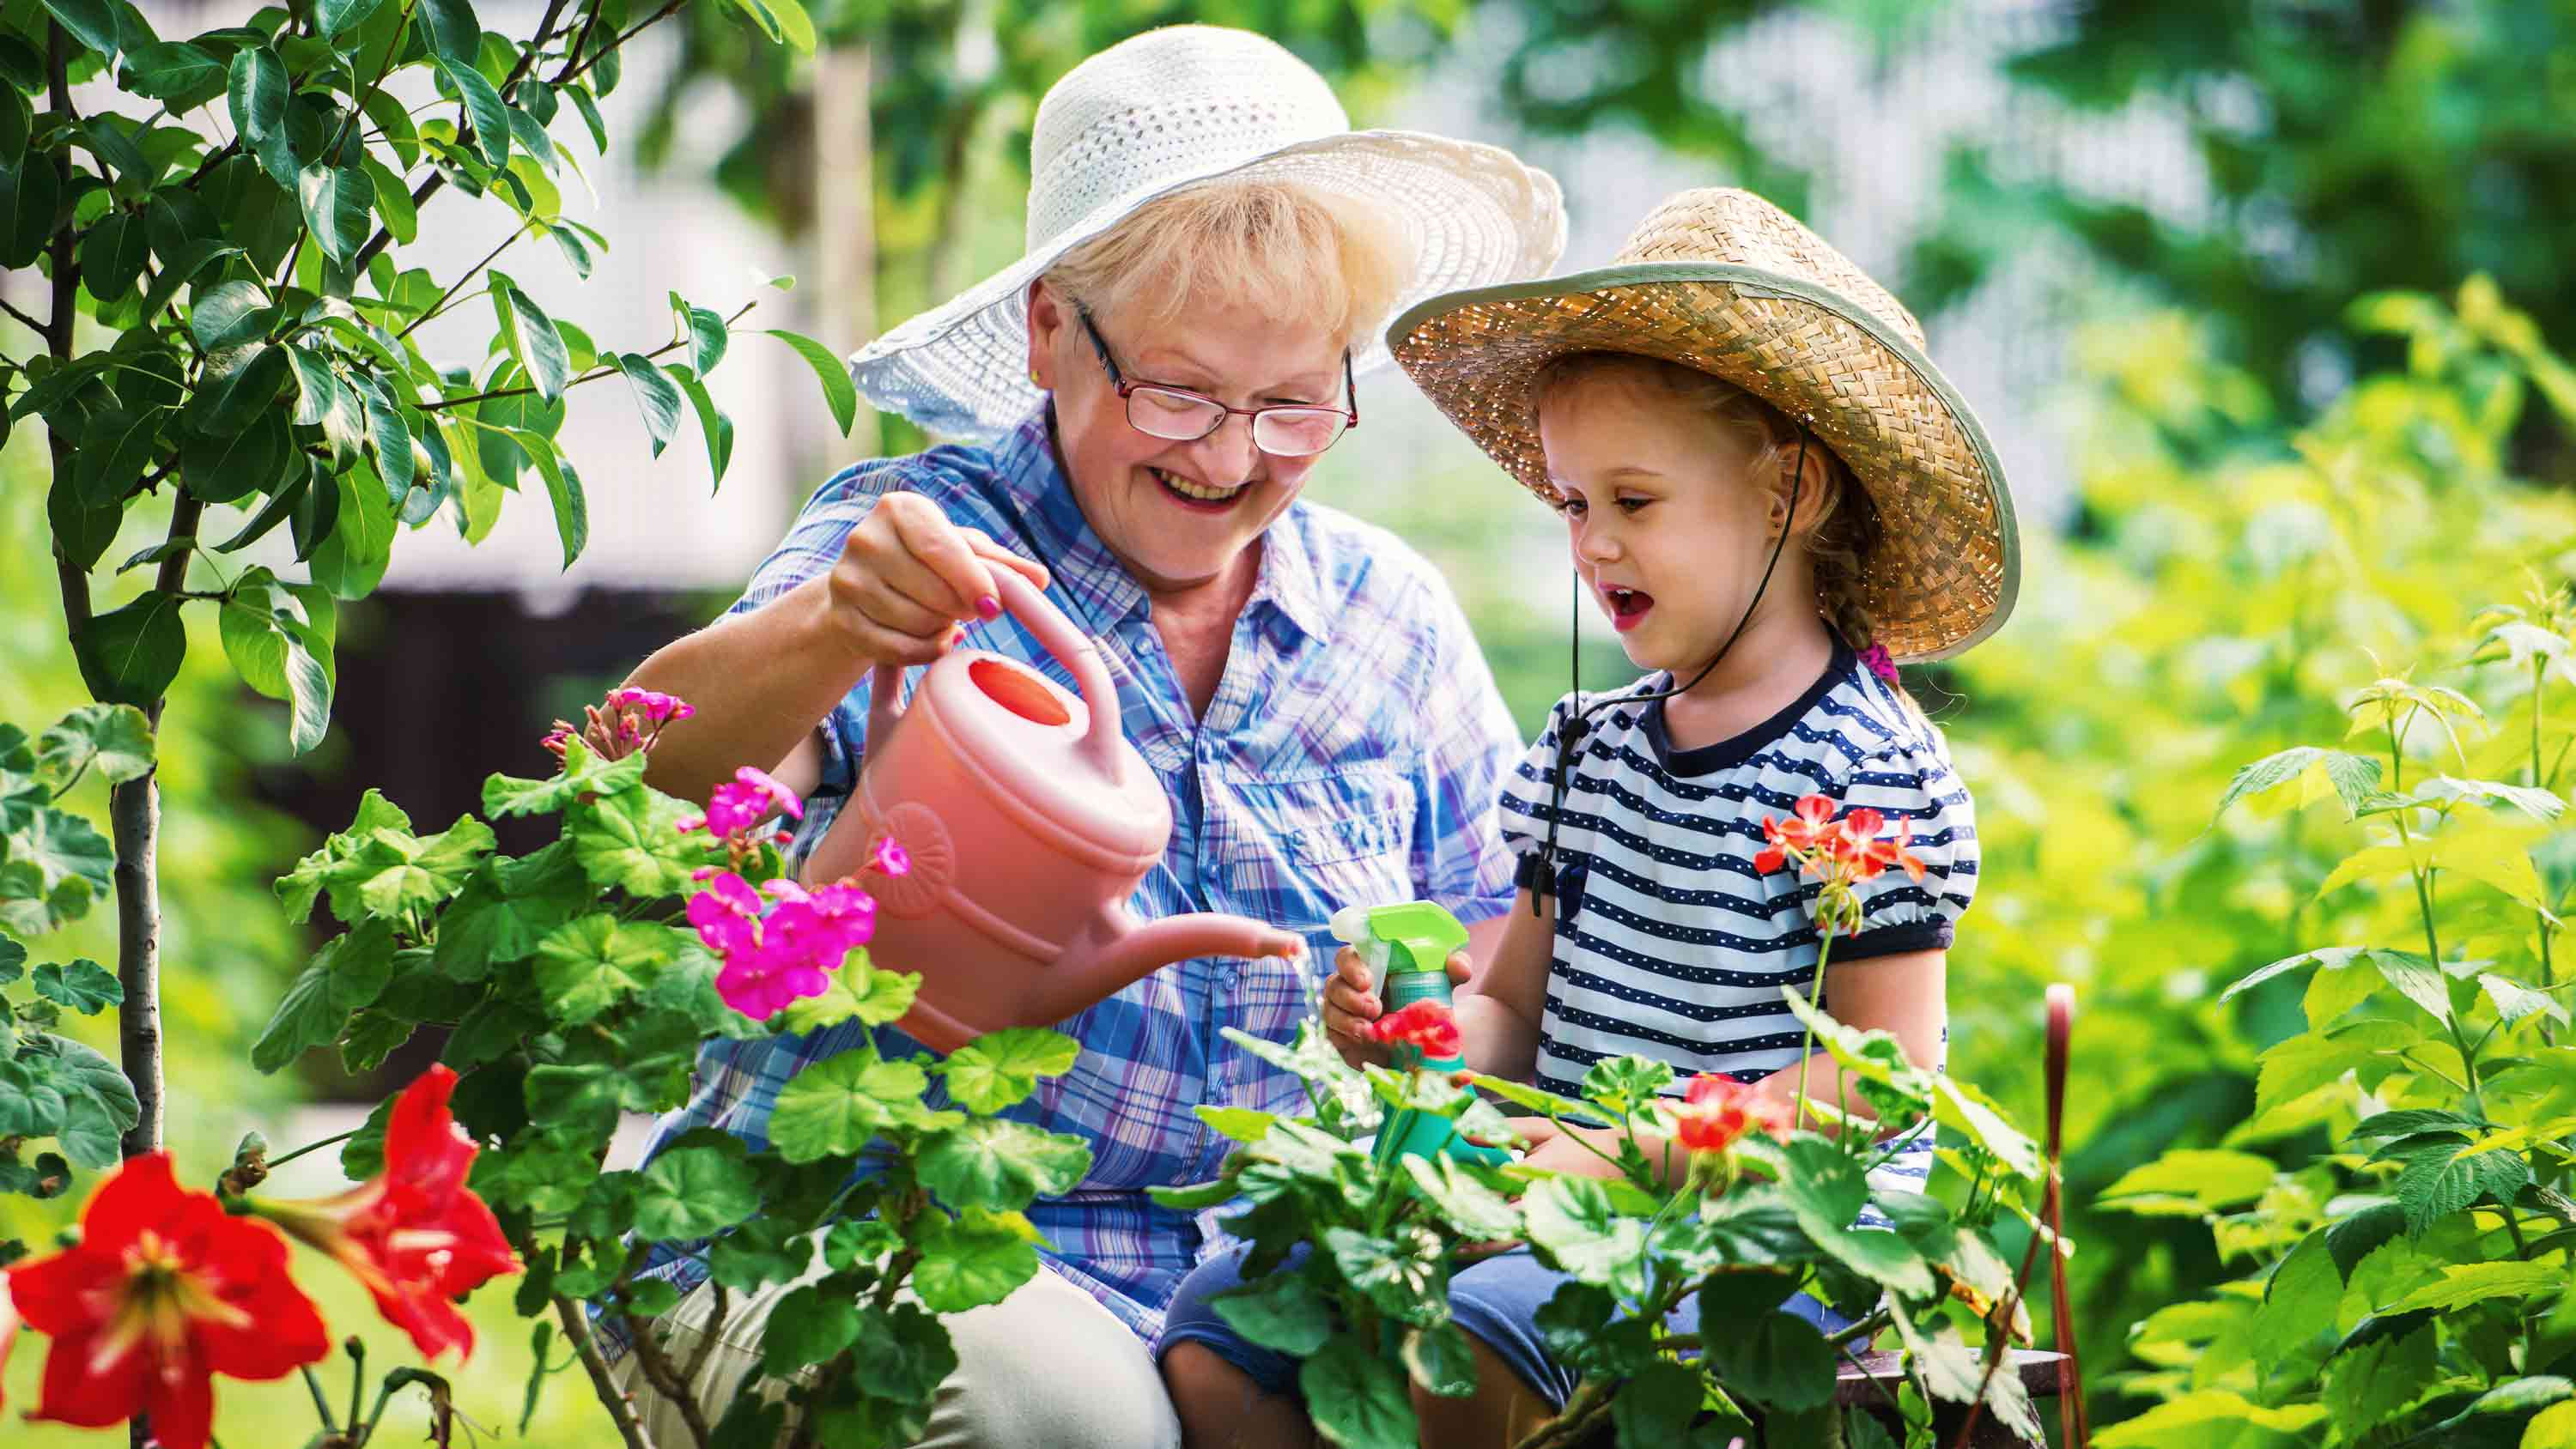 Senior and child watering flowers in the garden